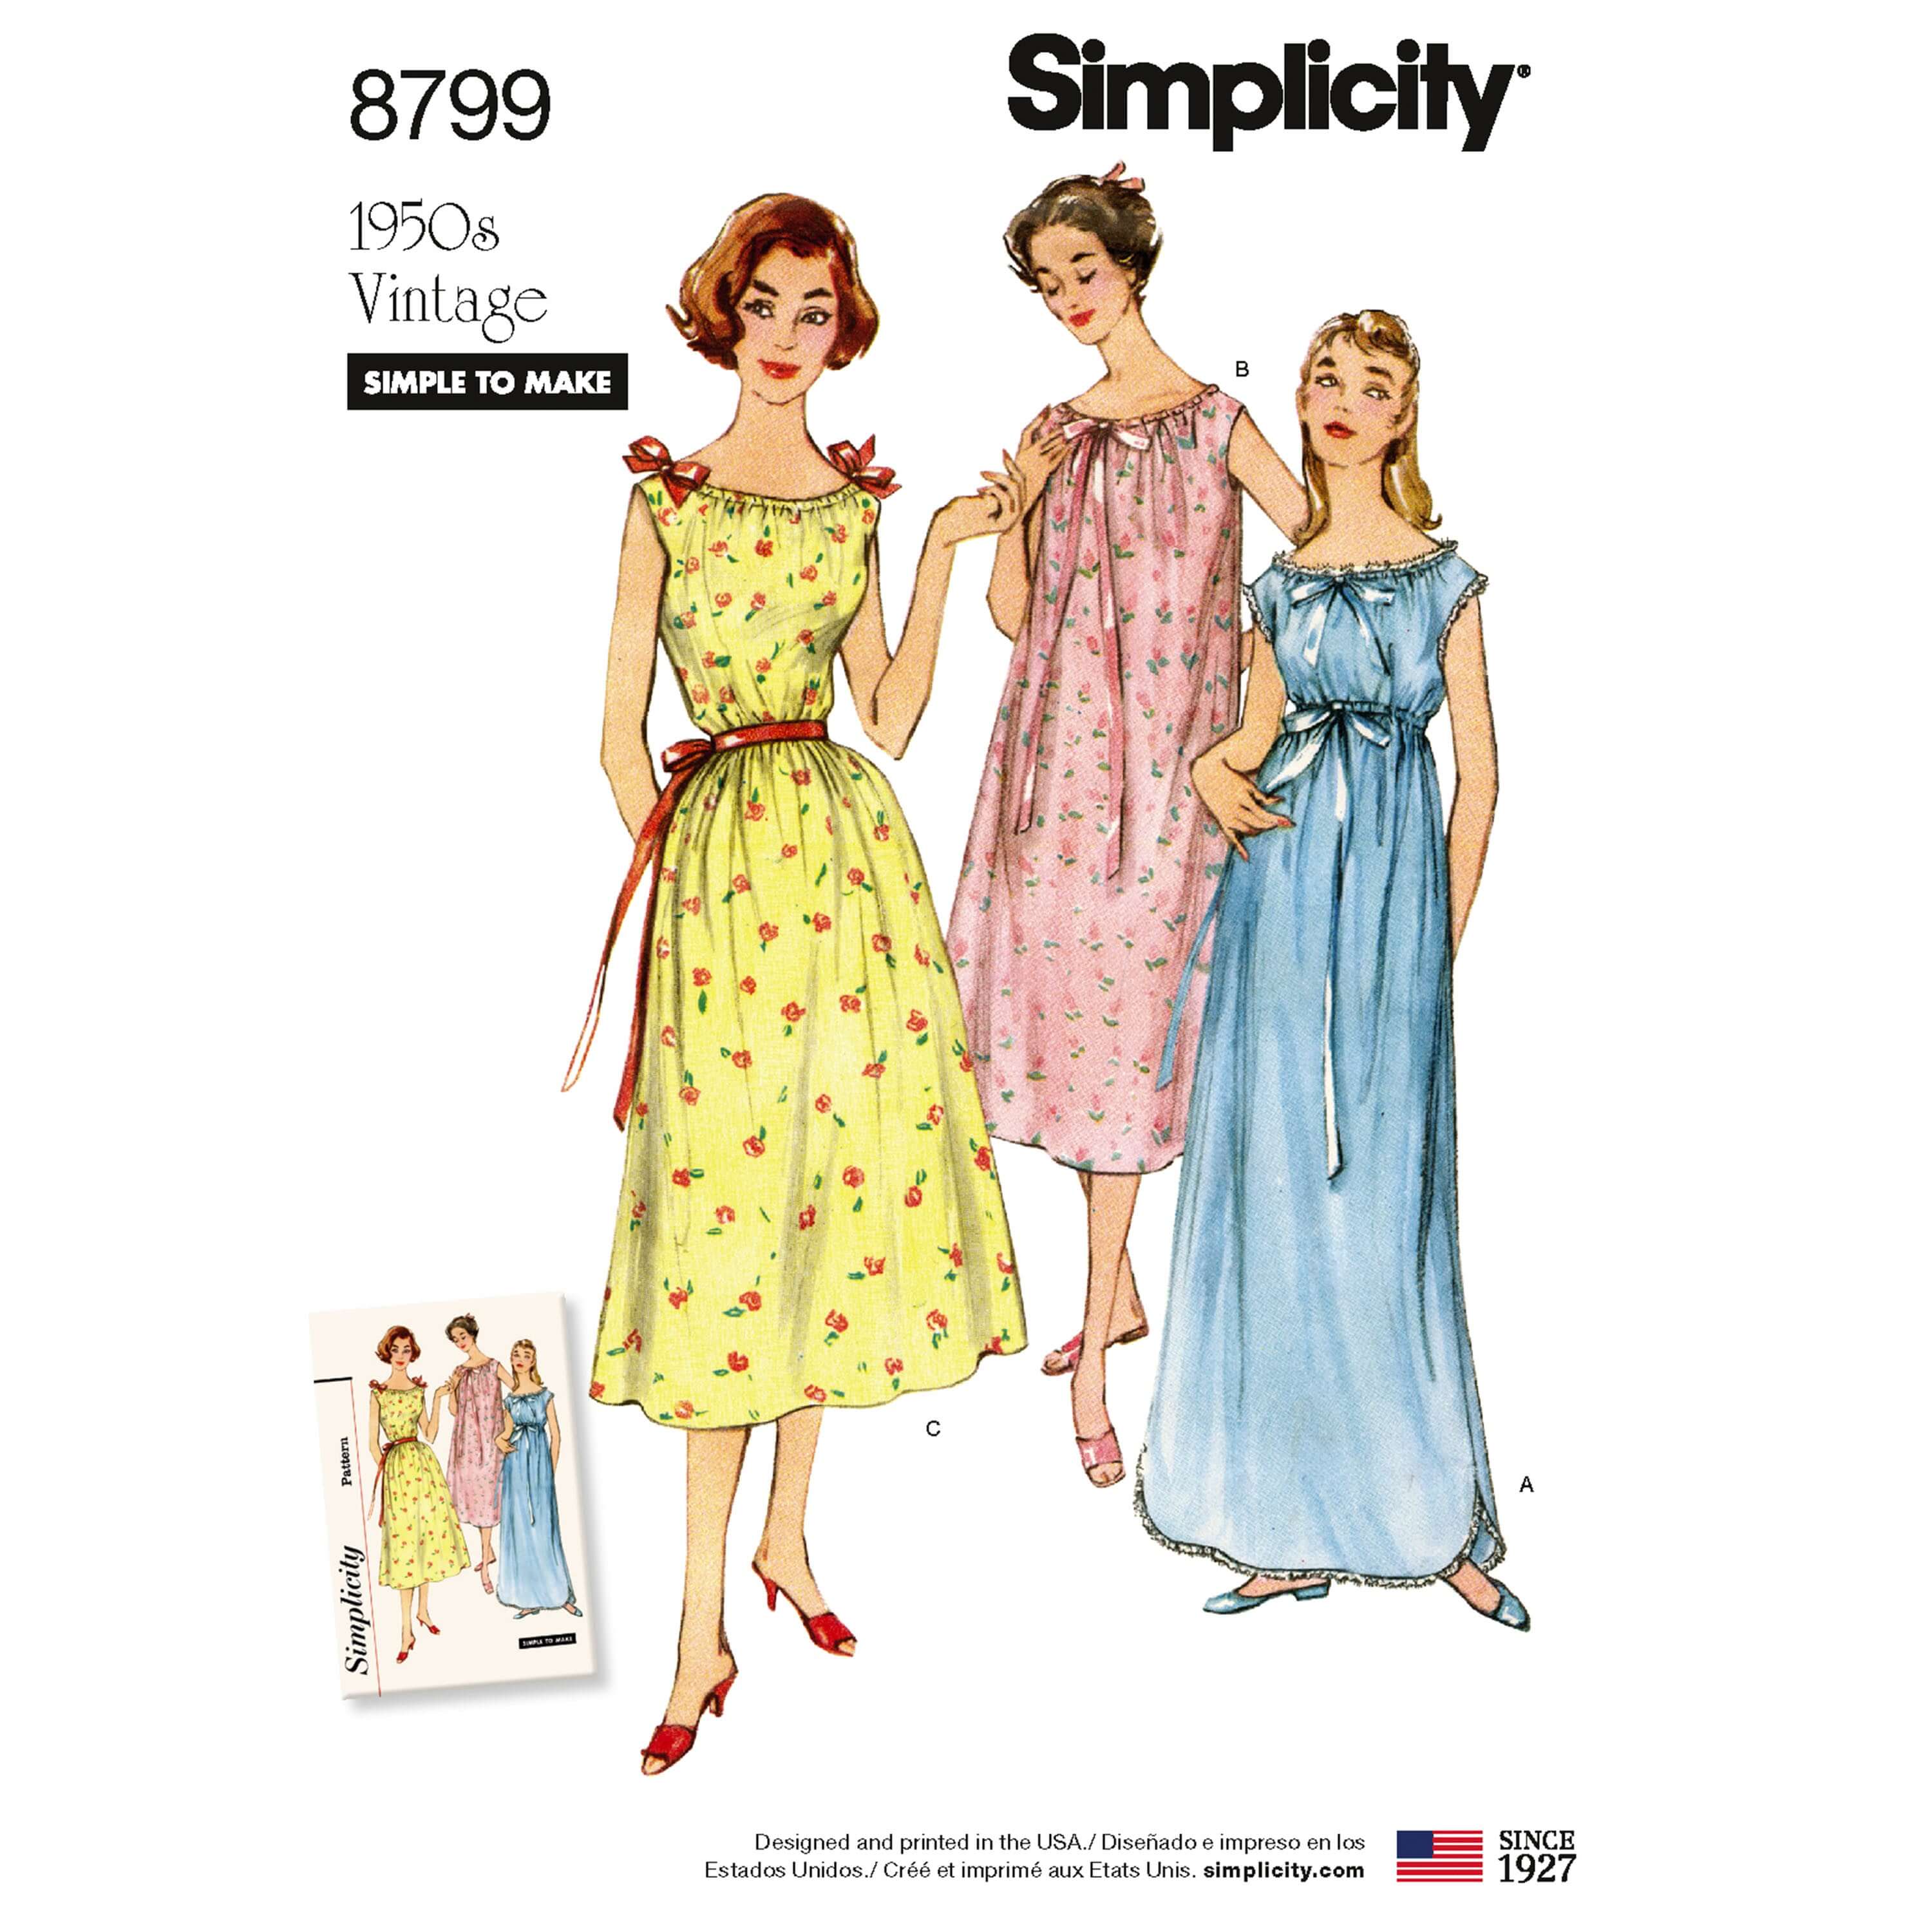 Simplicity 8799 Misses' Vintage Nightgowns Sewing Patterns